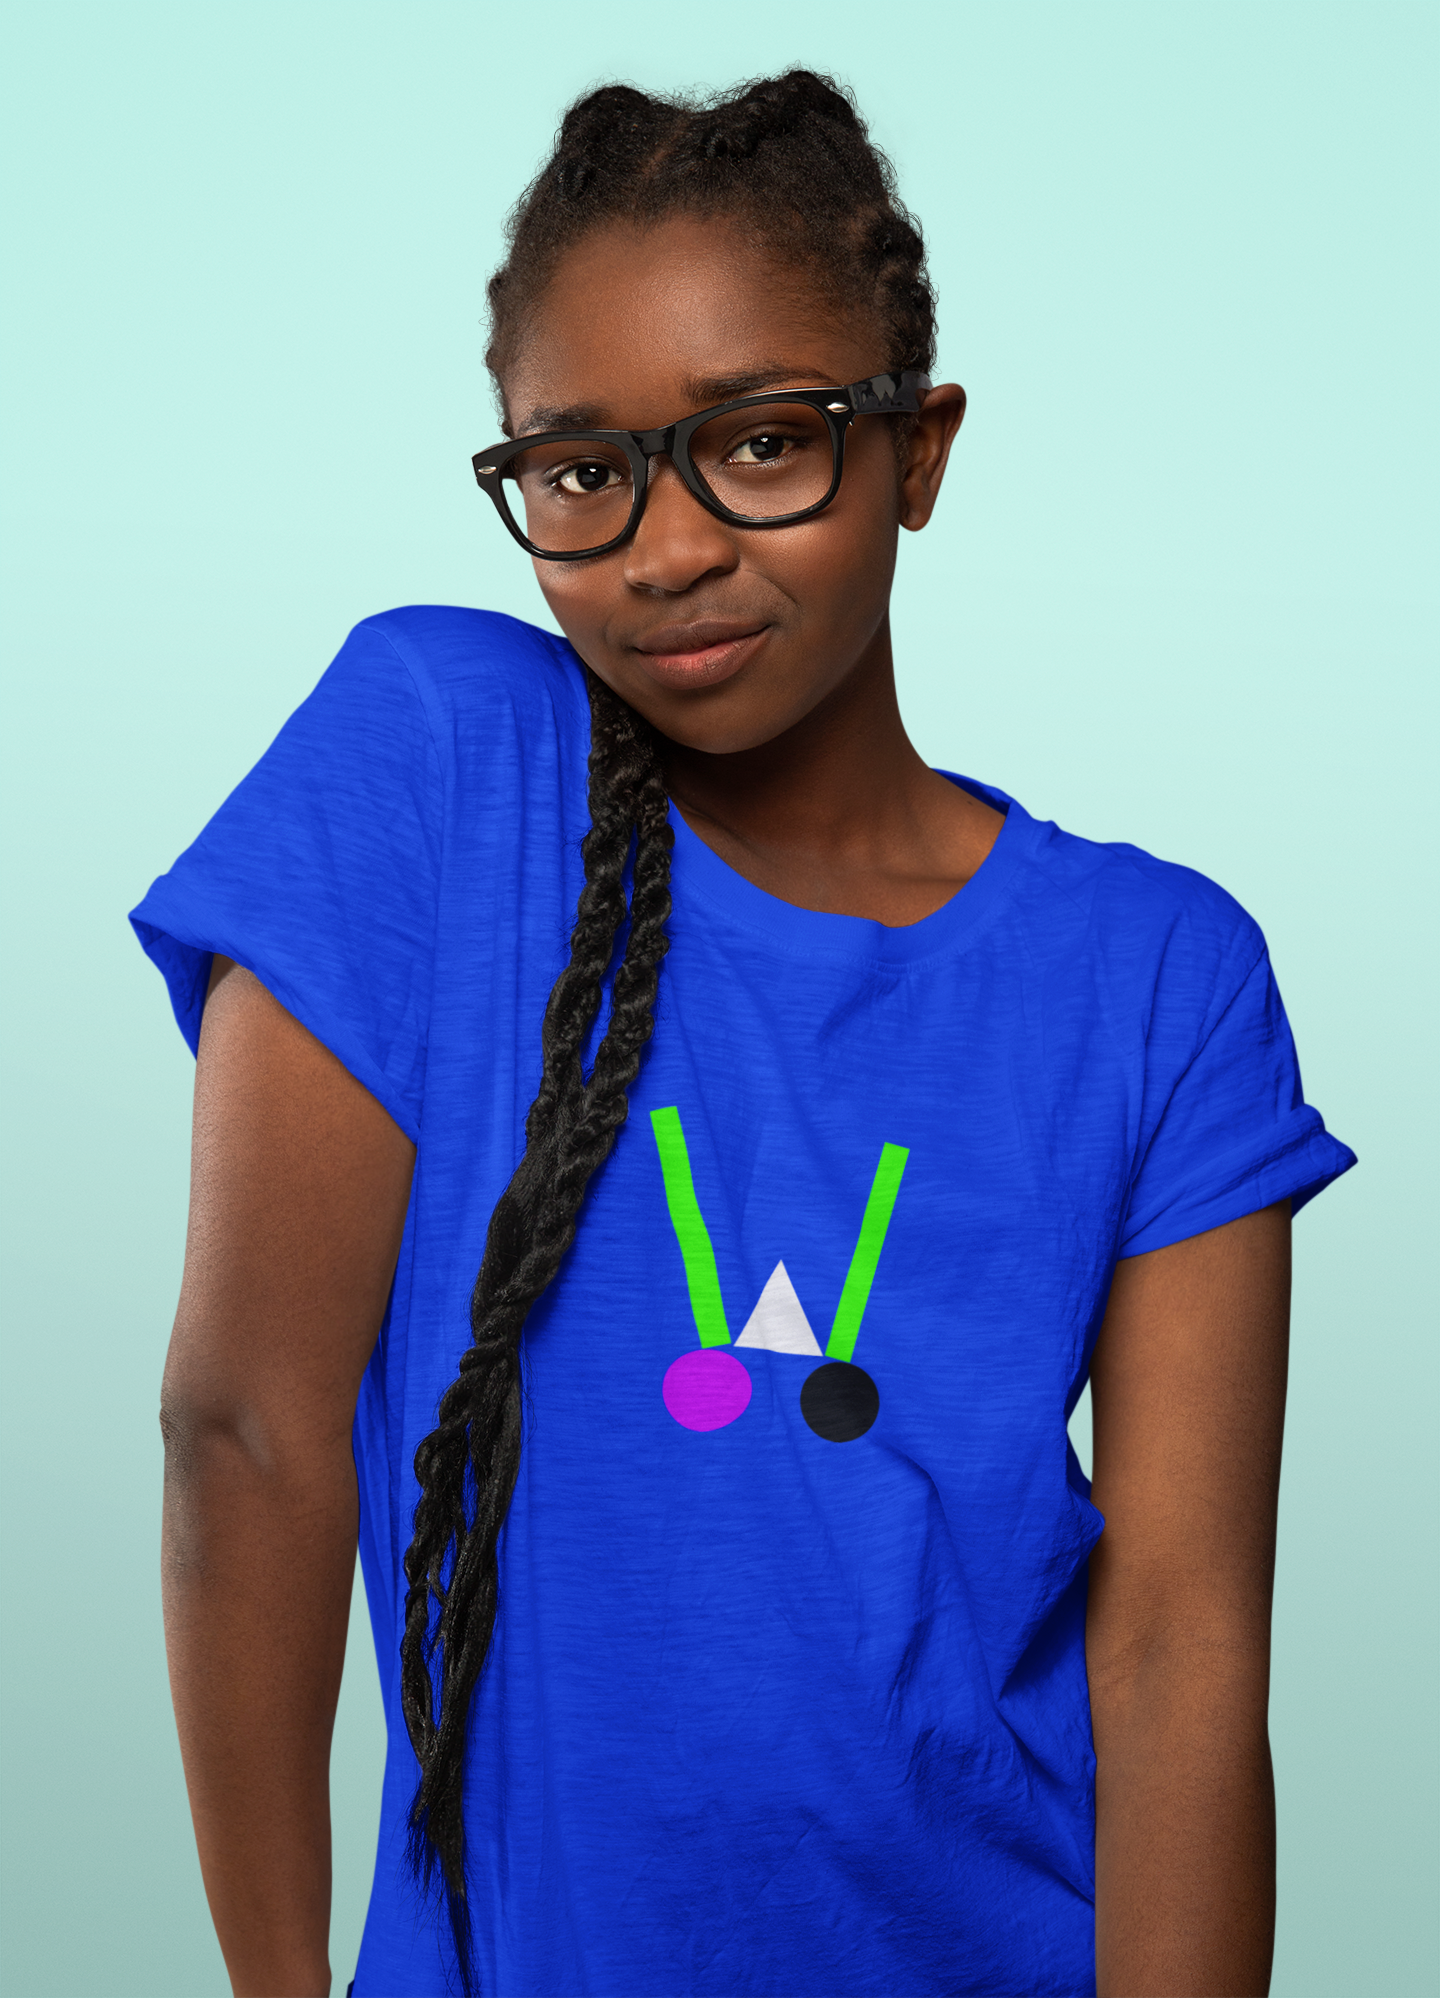 "W" Initial Youth T-shirt